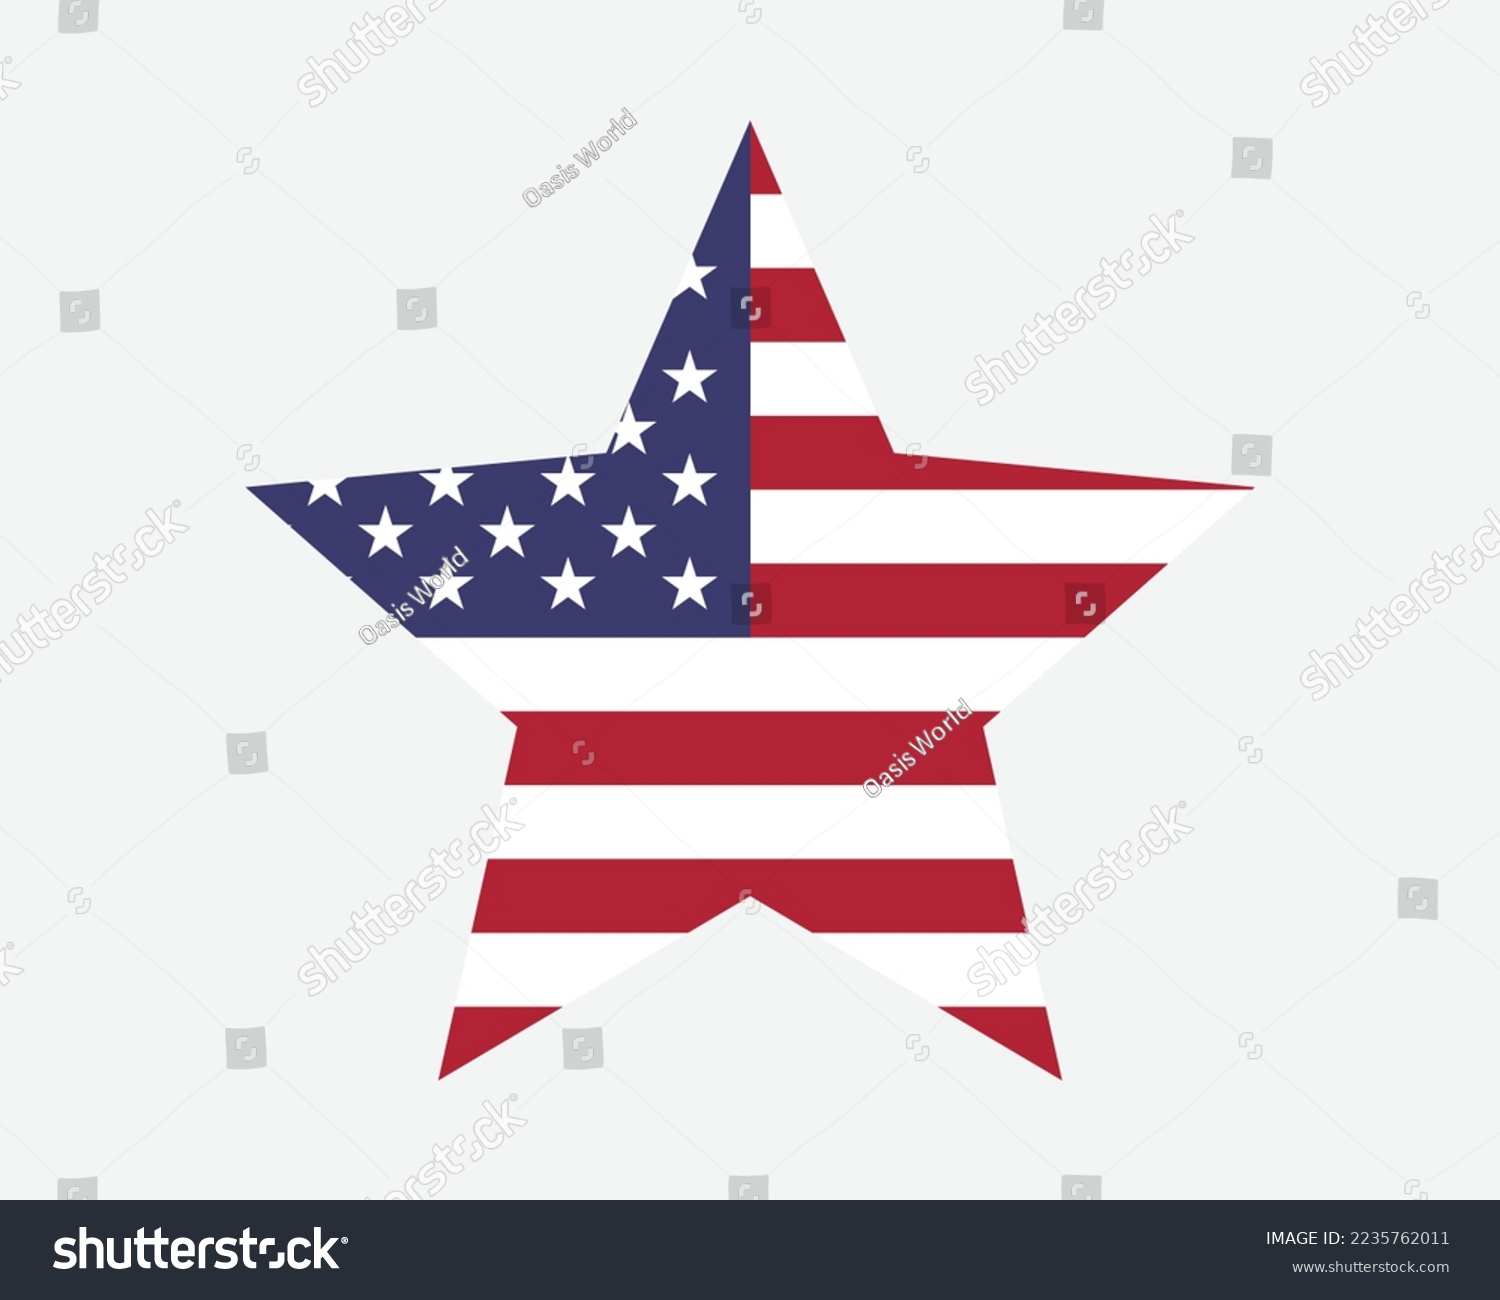 SVG of USA Star Flag. US United States of America Star Shape Flag. American Star Spangled Banner Old Glory Country National Icon Symbol Vector Illustration svg